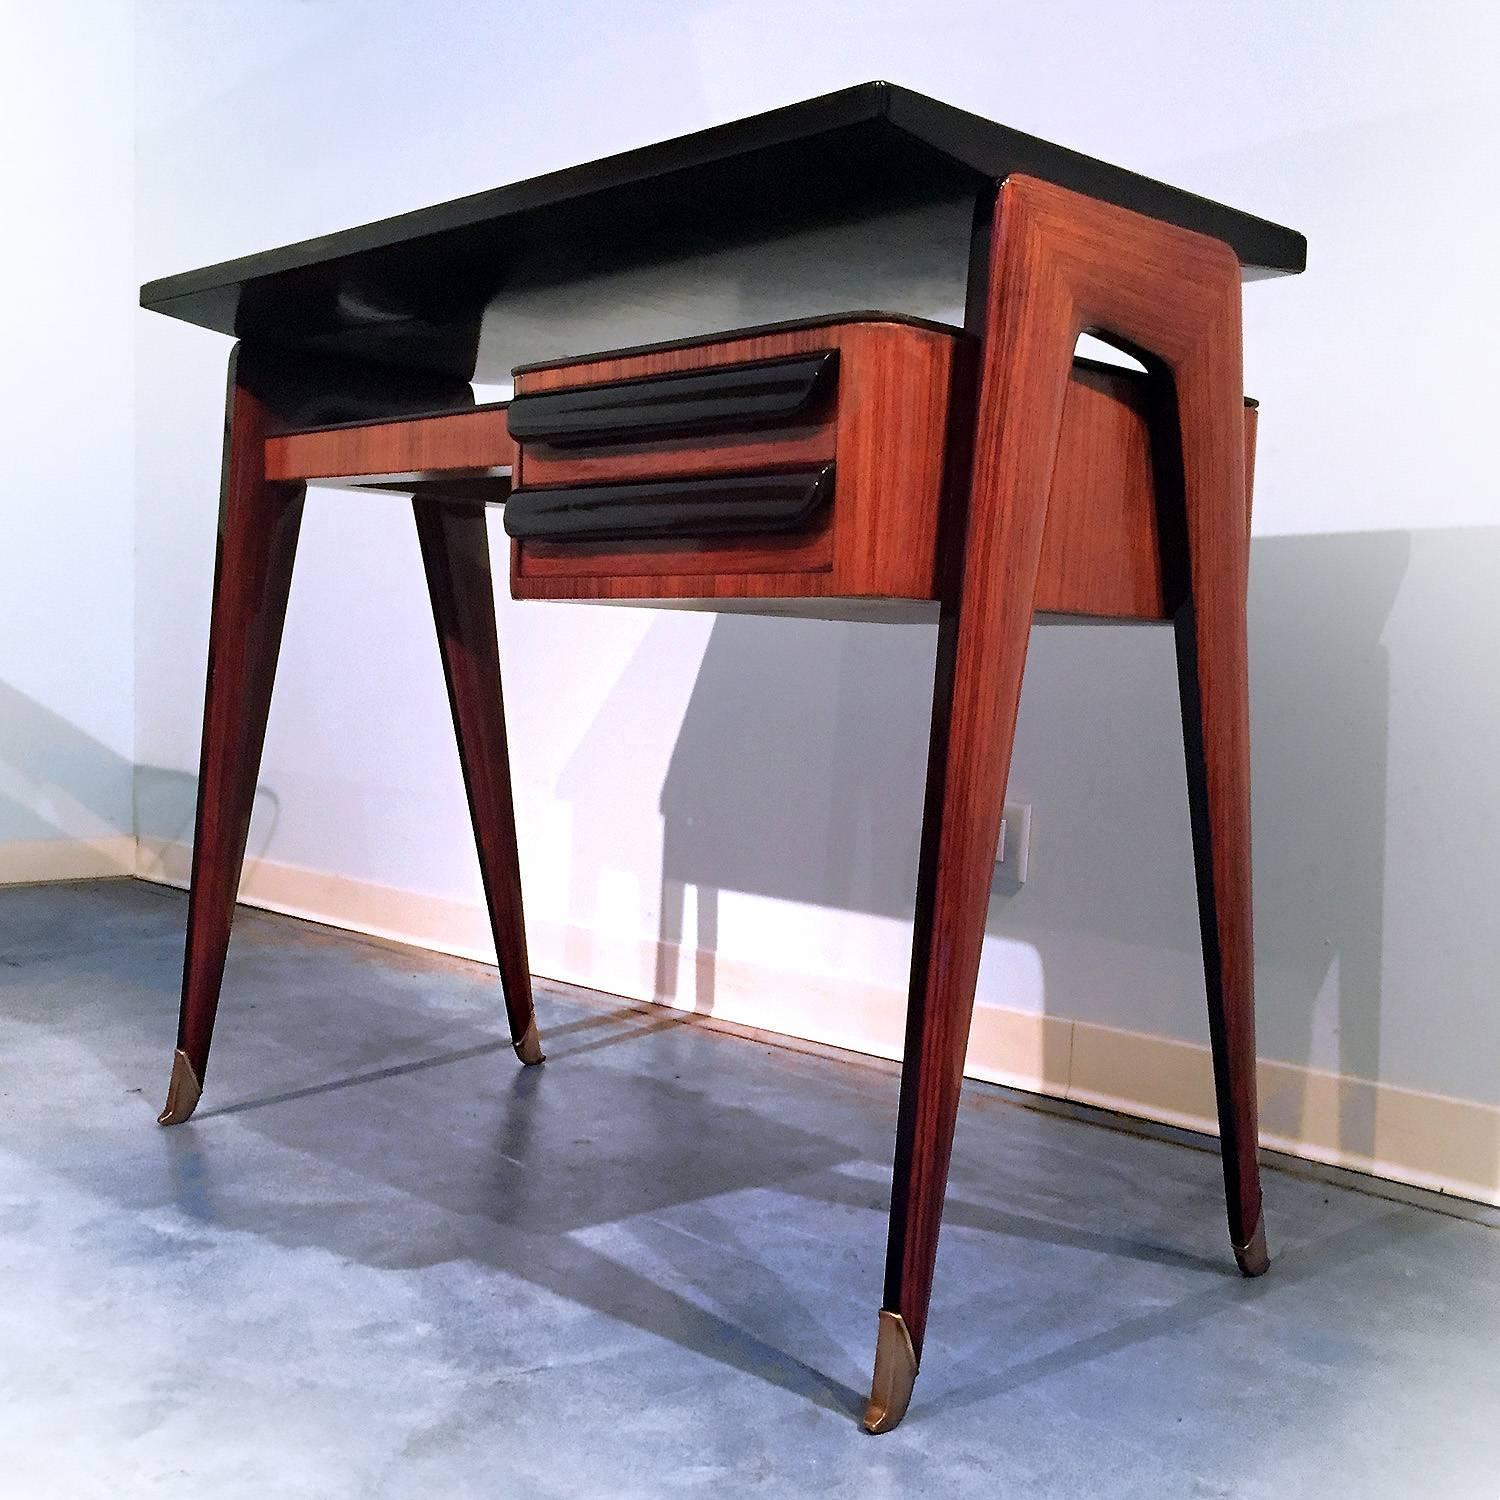 This stylish Italian petite desk, elegantly named 'dattilo', was designed by Vittorio Dassi in the 1950s.
The rosewood veneer structure is provided with green glass top and shelf with two drawers, finished with brass sabots.
Narrow depth makes this